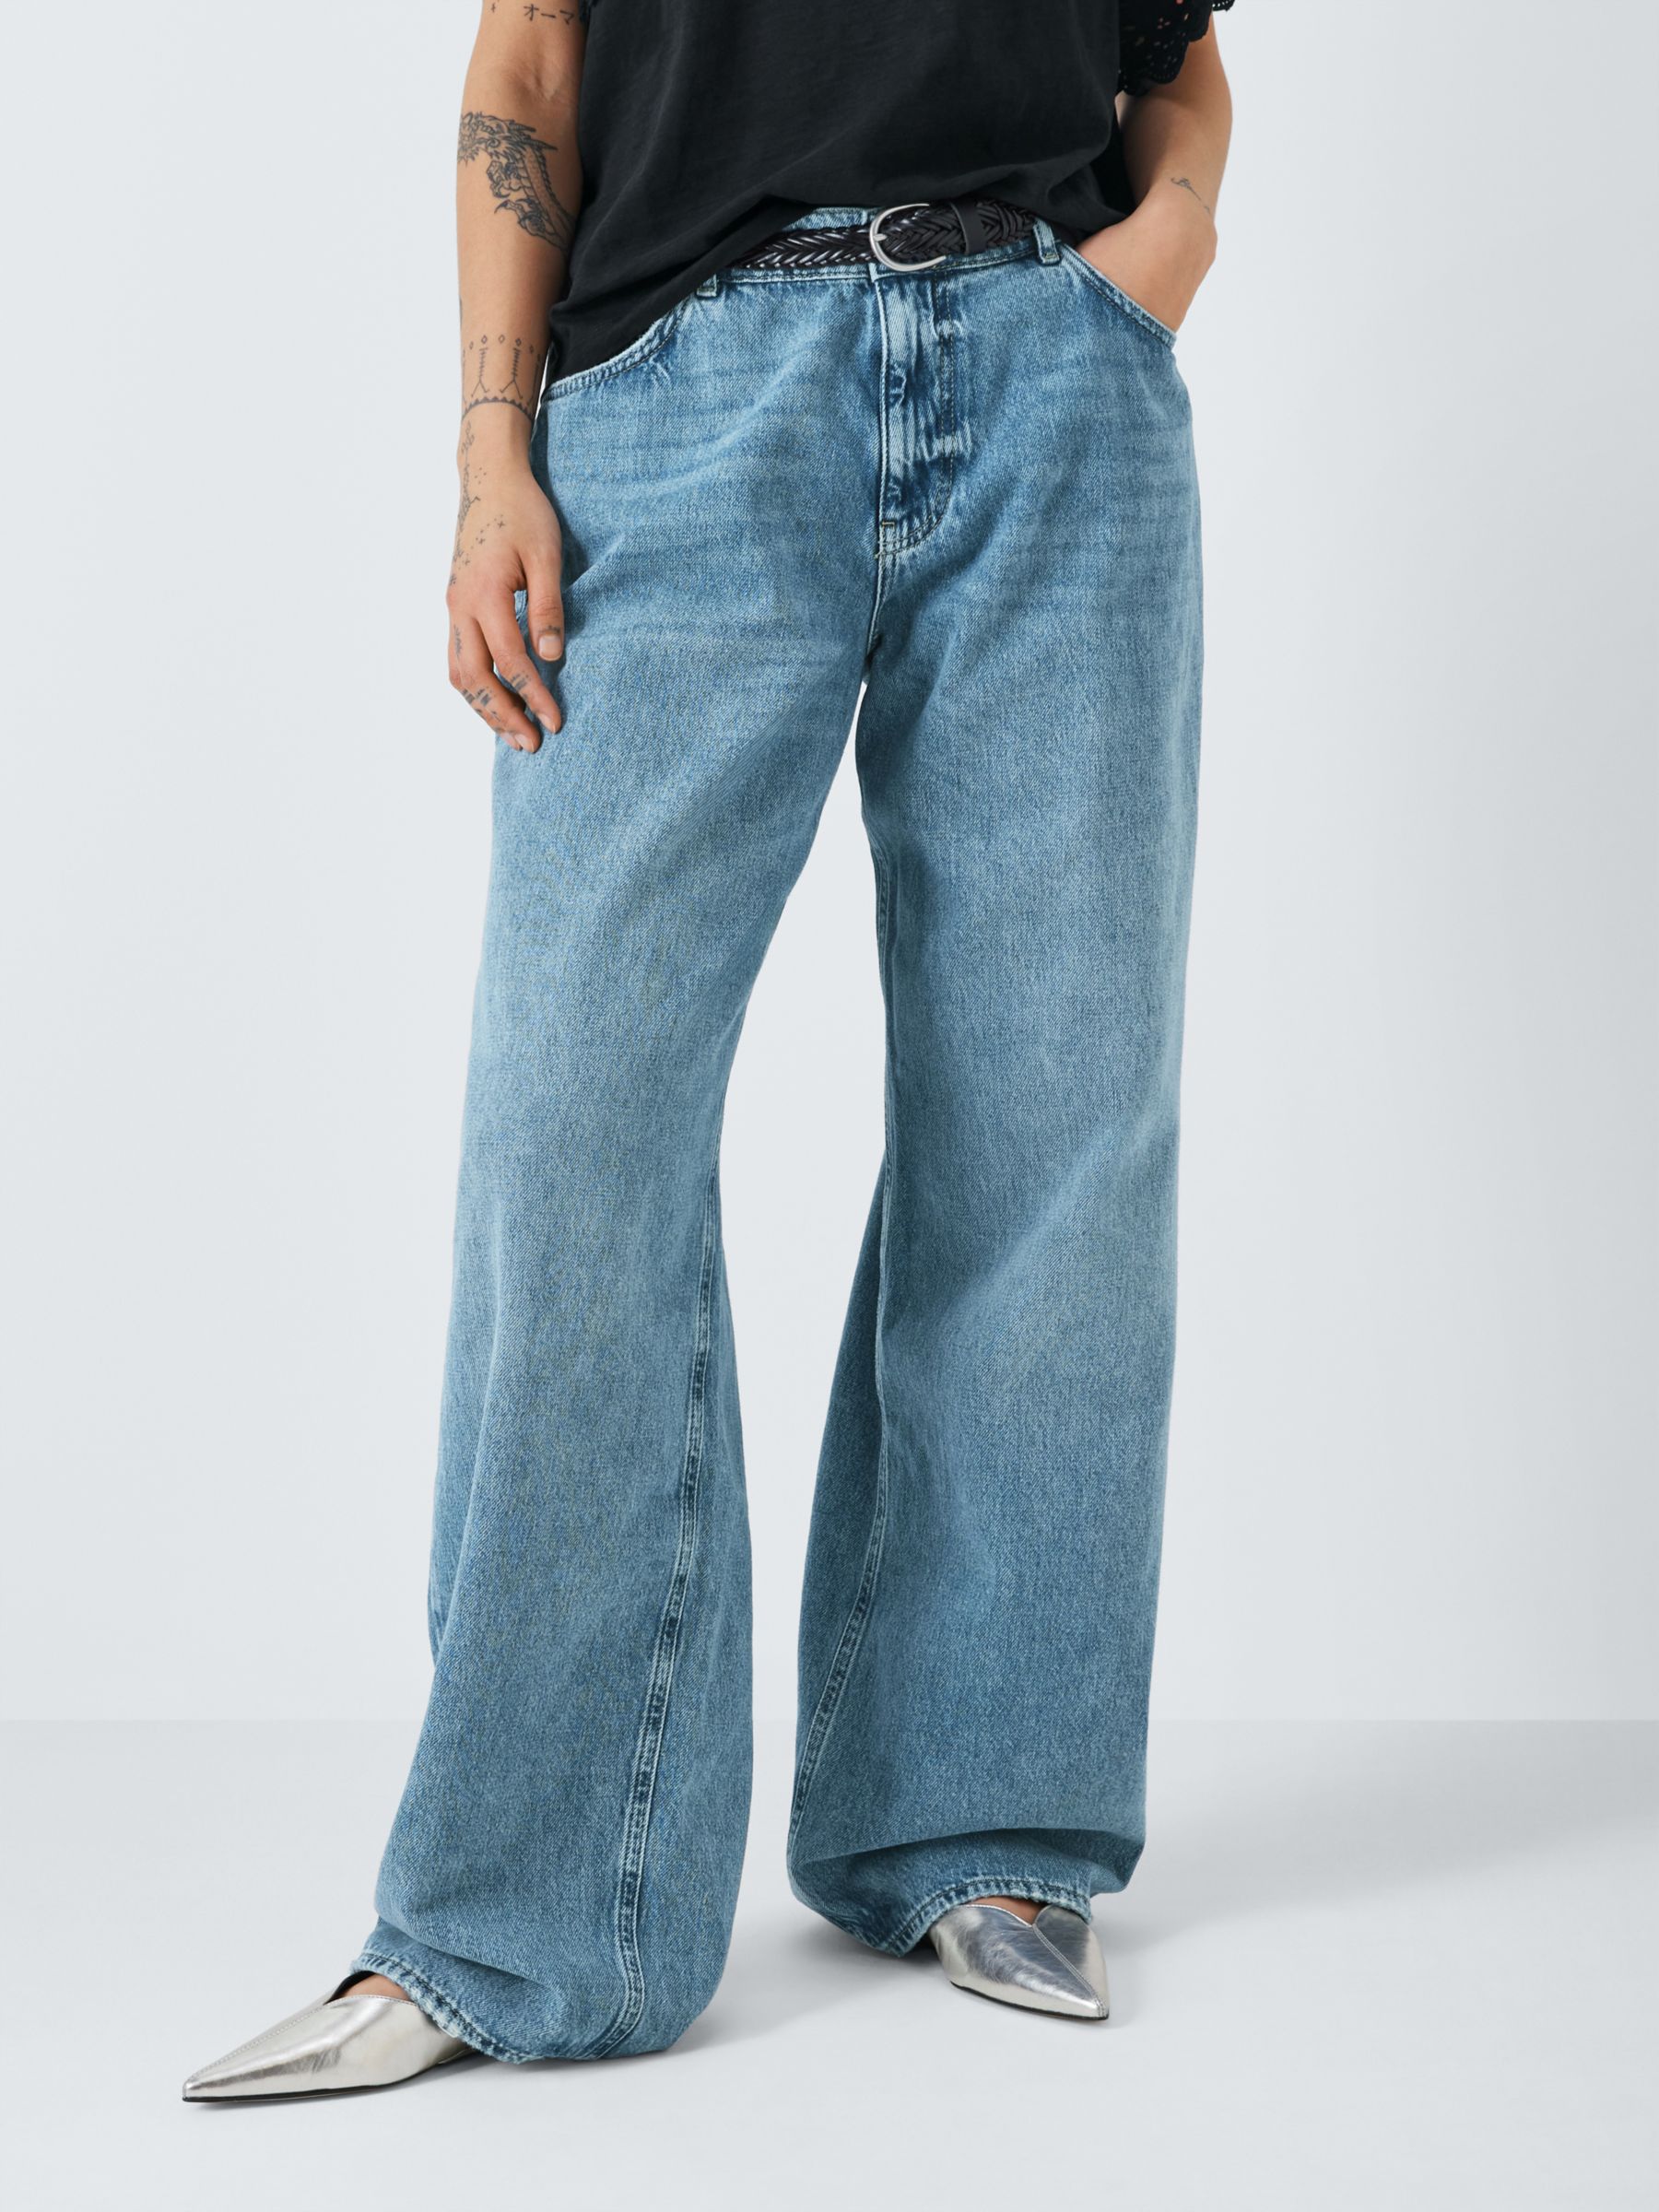 AND/OR Pasadena Puddle Jeans, Blue, 32R